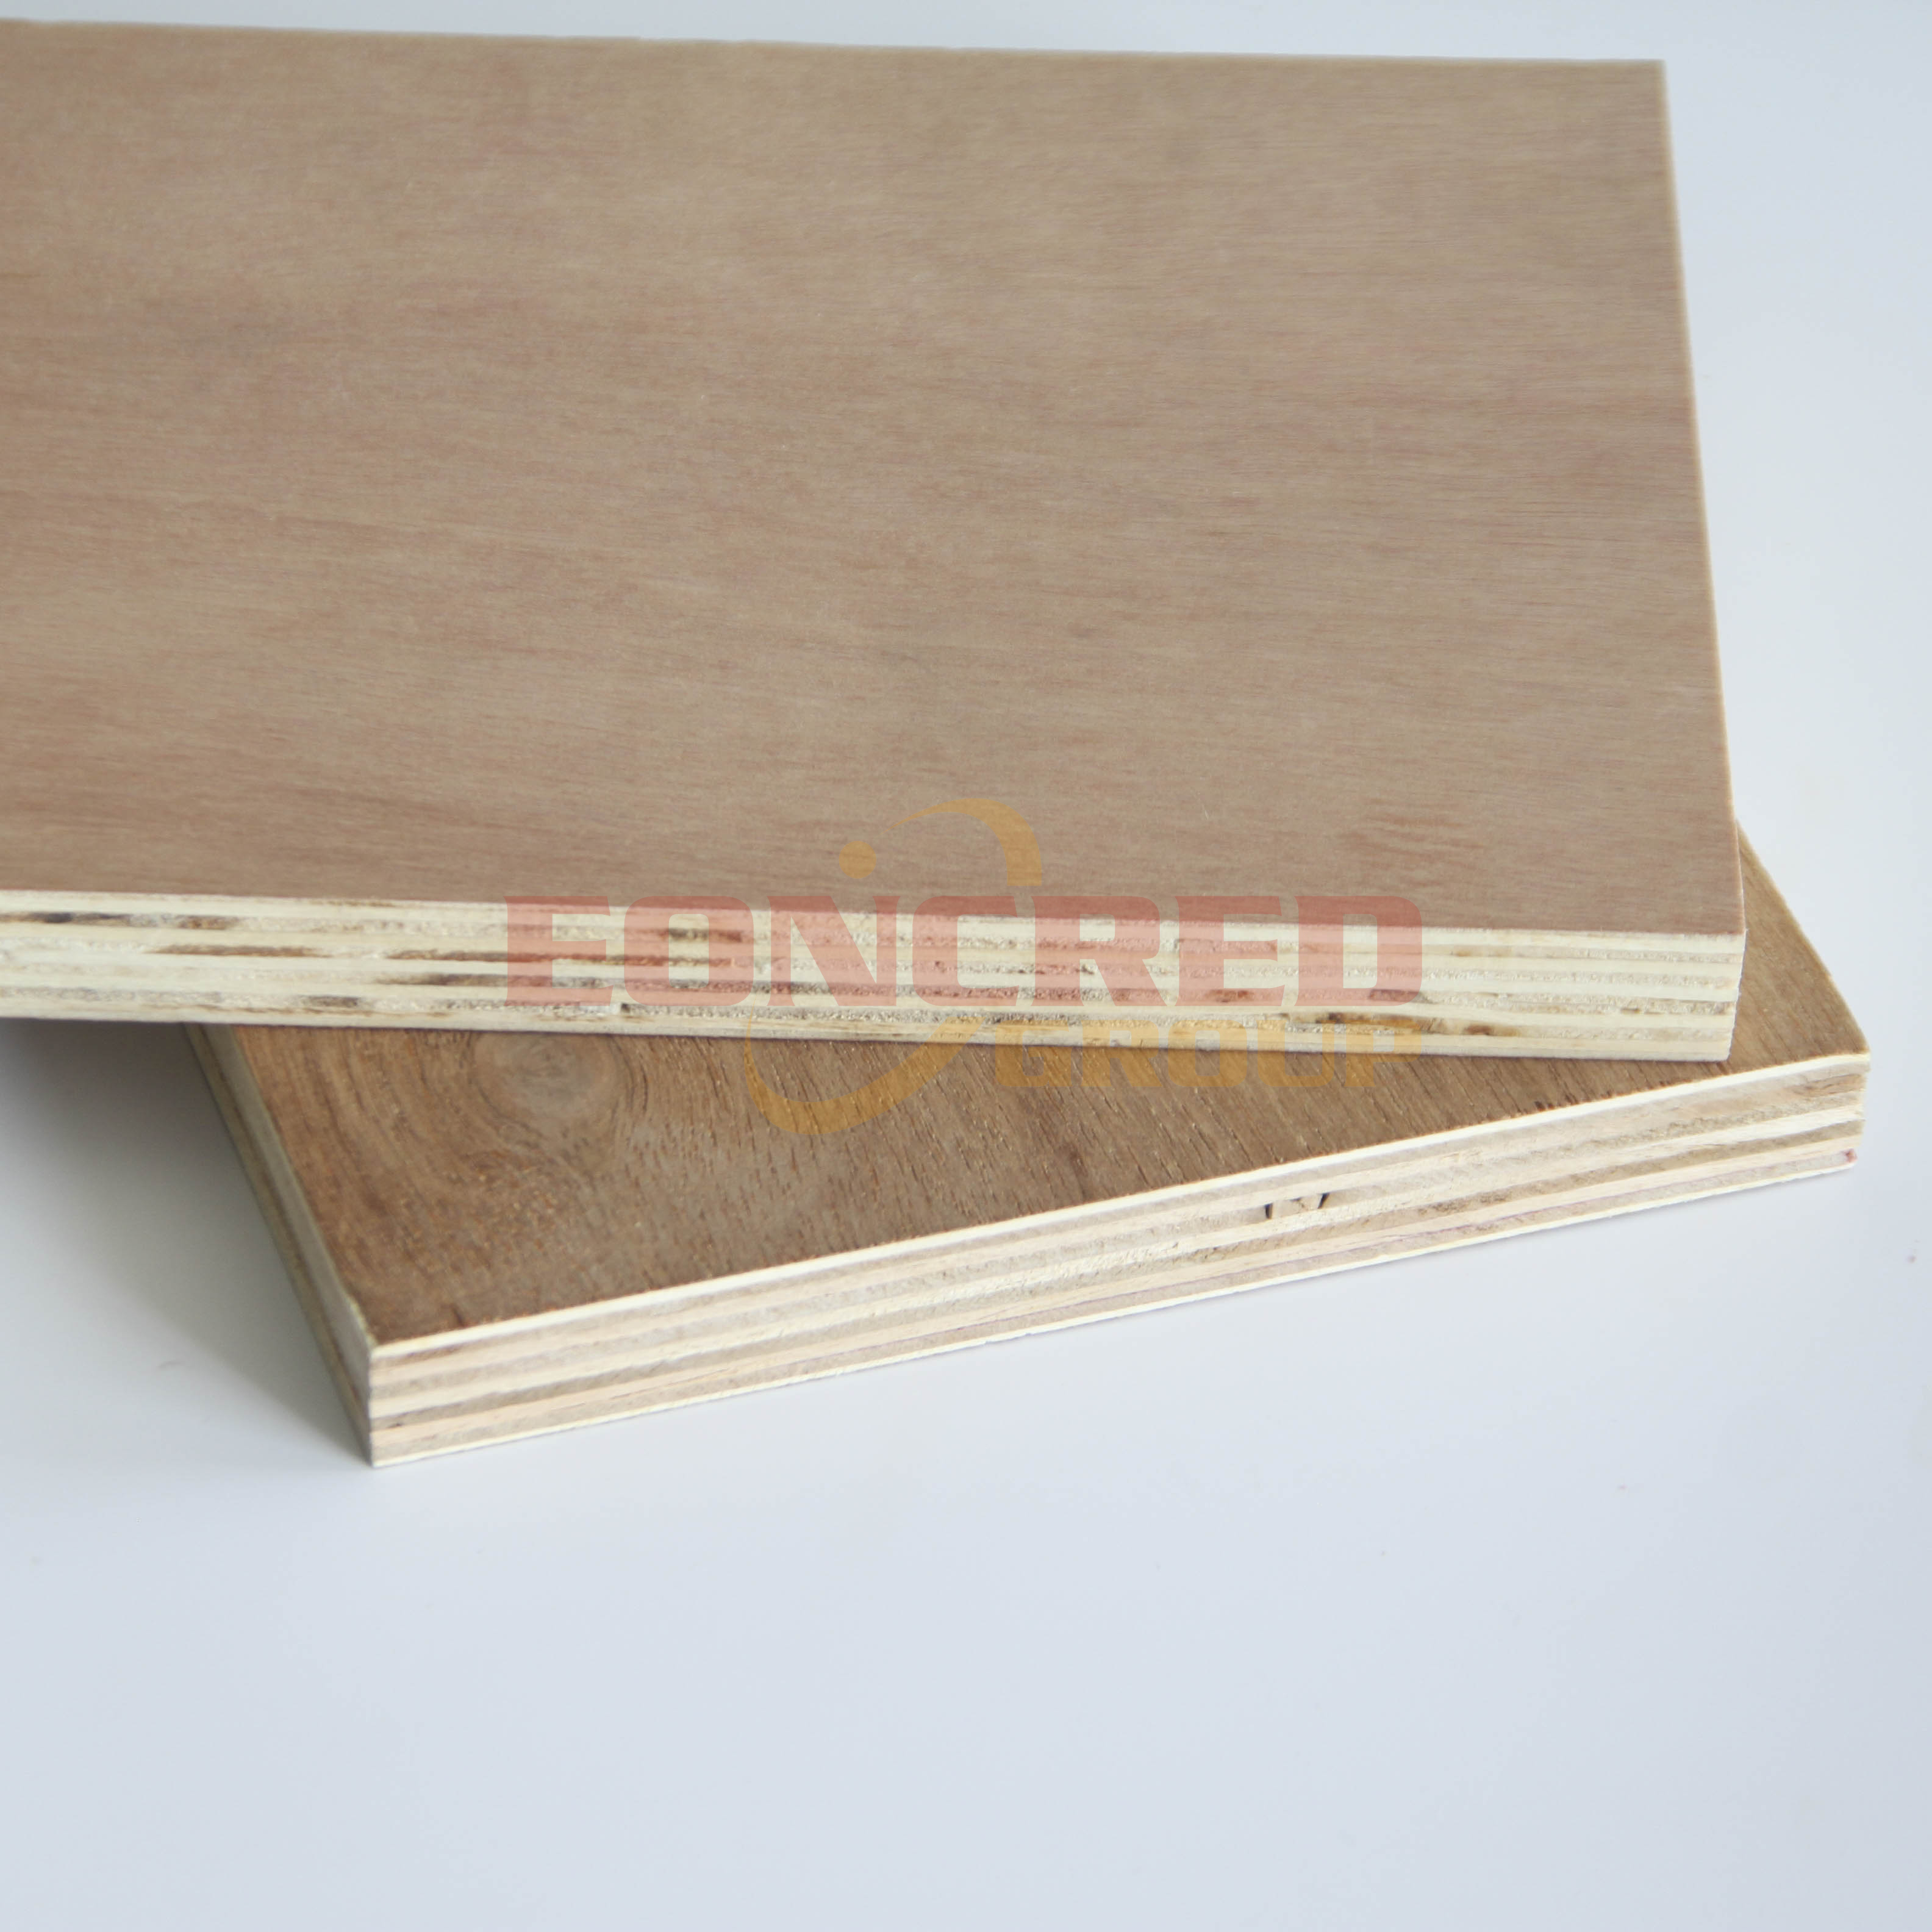 Whole Sale AB、 BC Grade Plywood 12mm/15mm/19mm Used in Furniture, Packaging, Flooring, Doors, Kitchen Cabinets